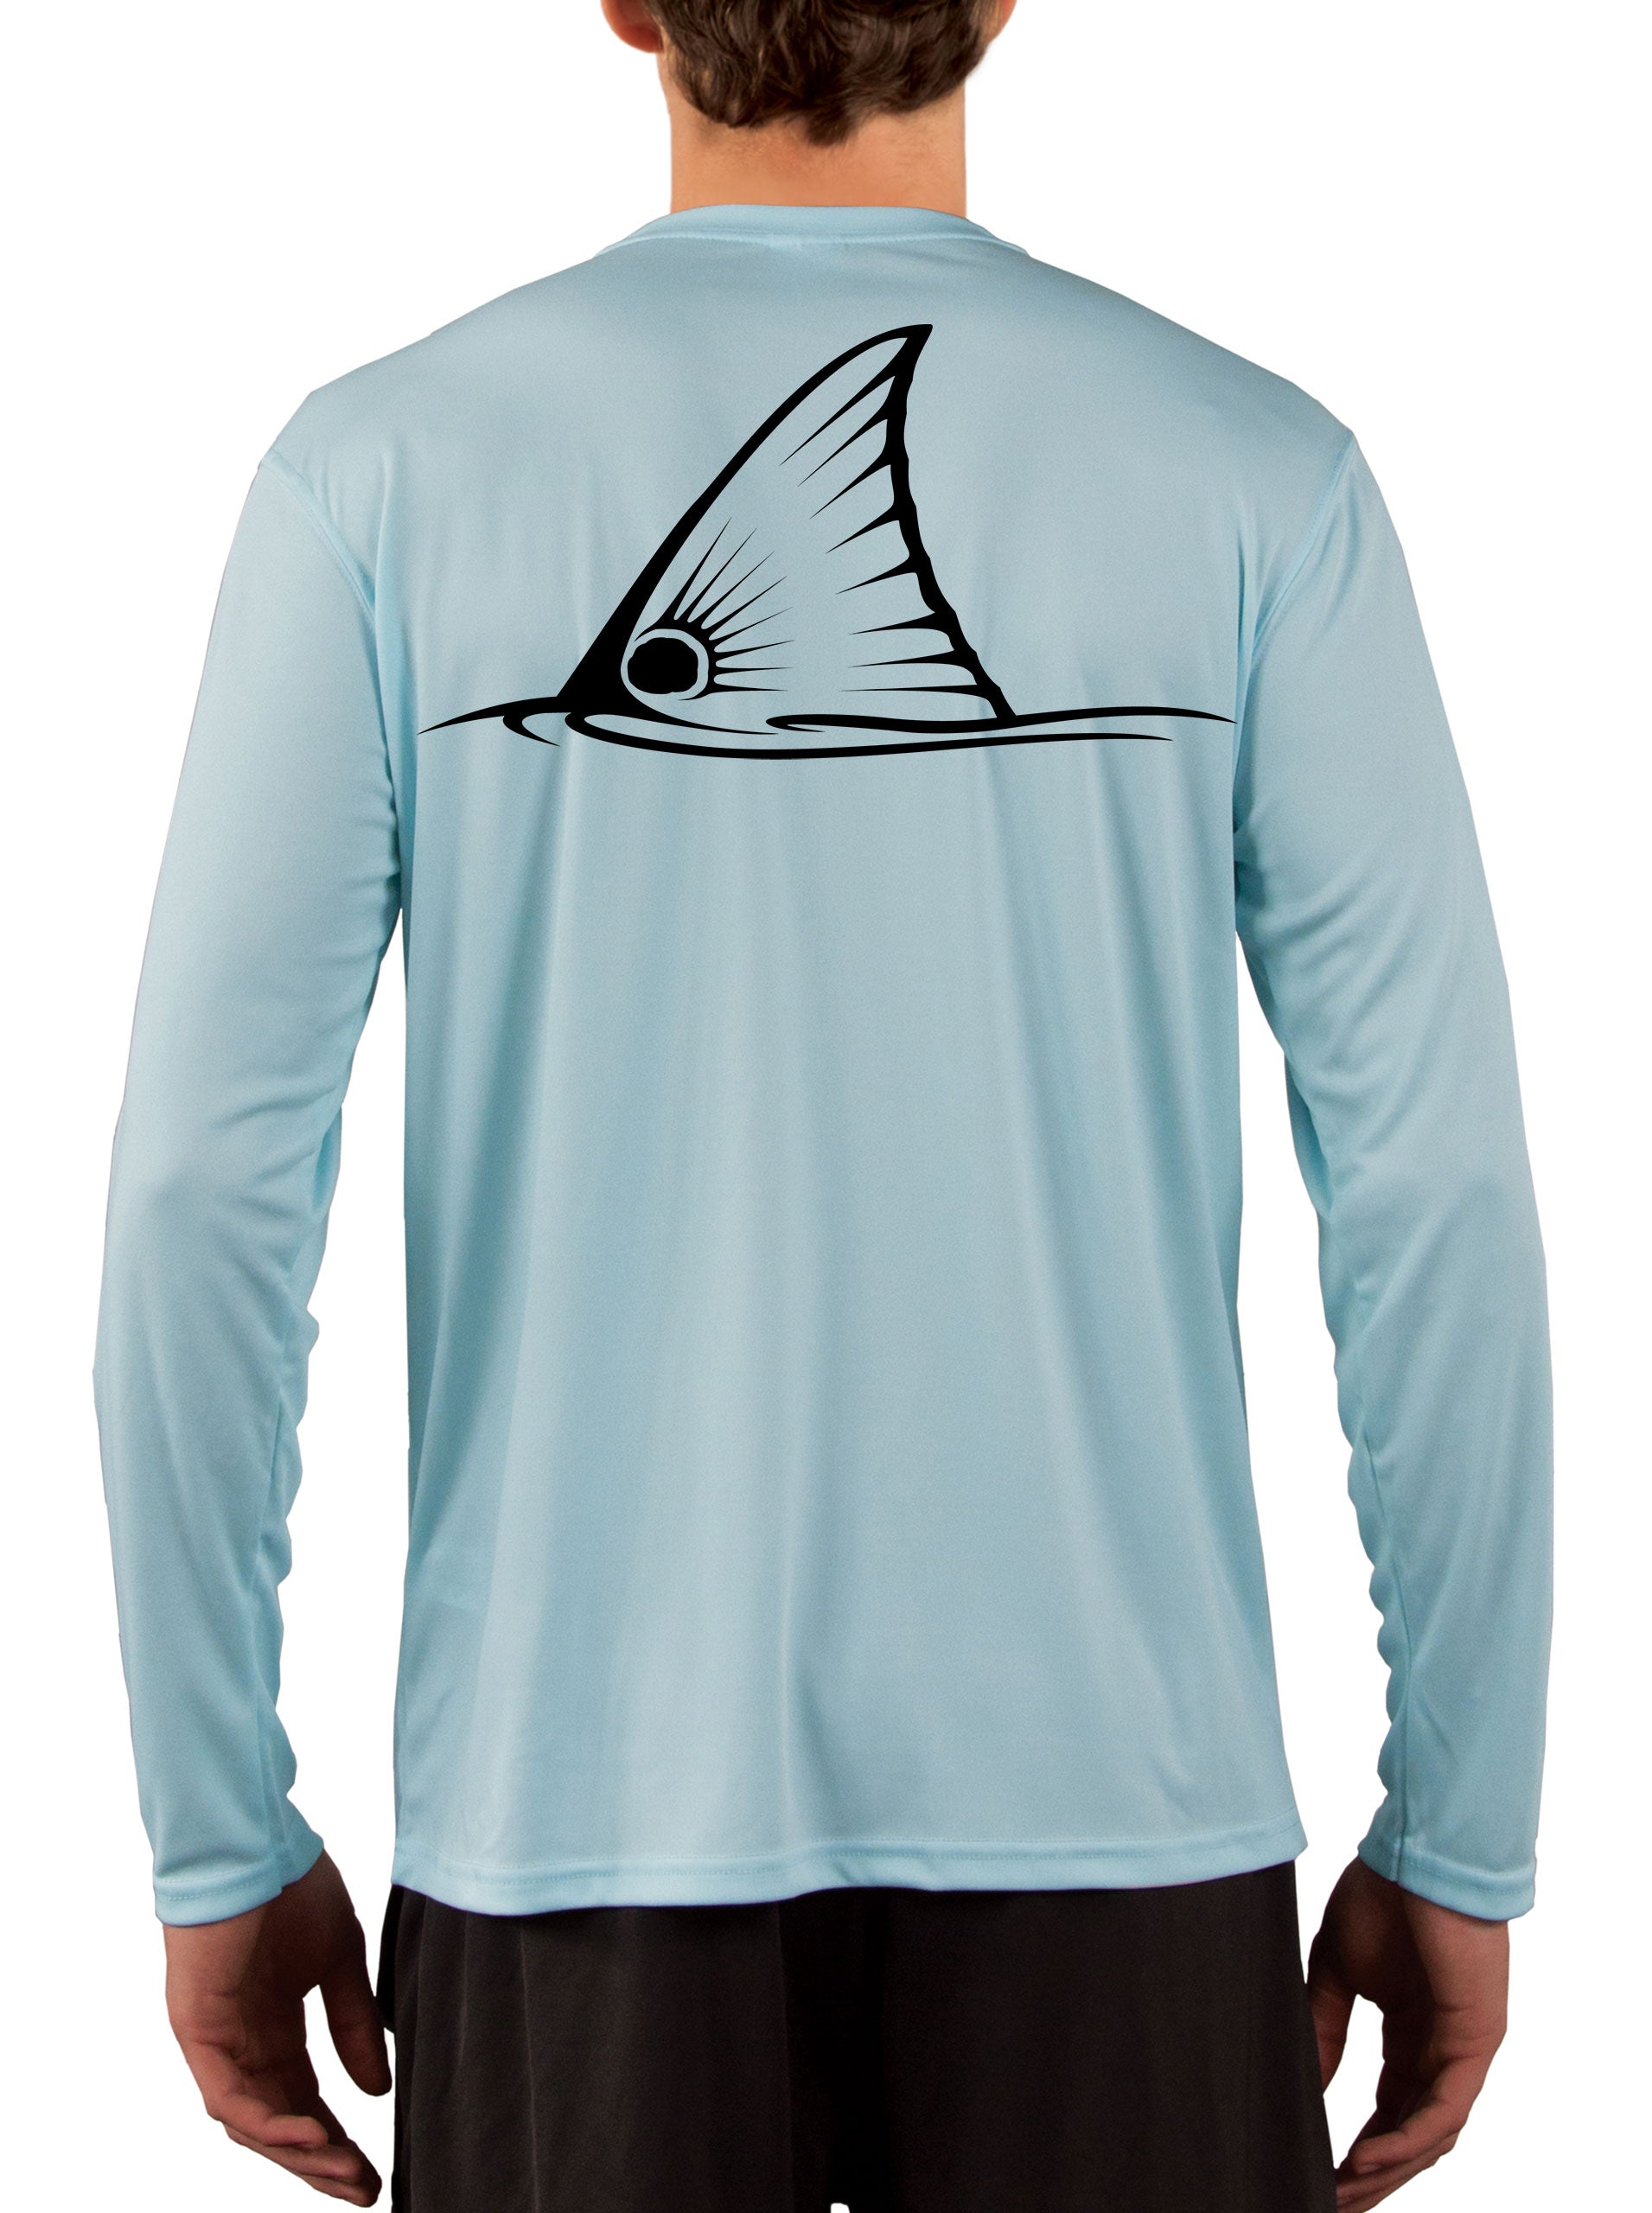 Moisture Wicking Fishing Shirts & Tops for Women for sale